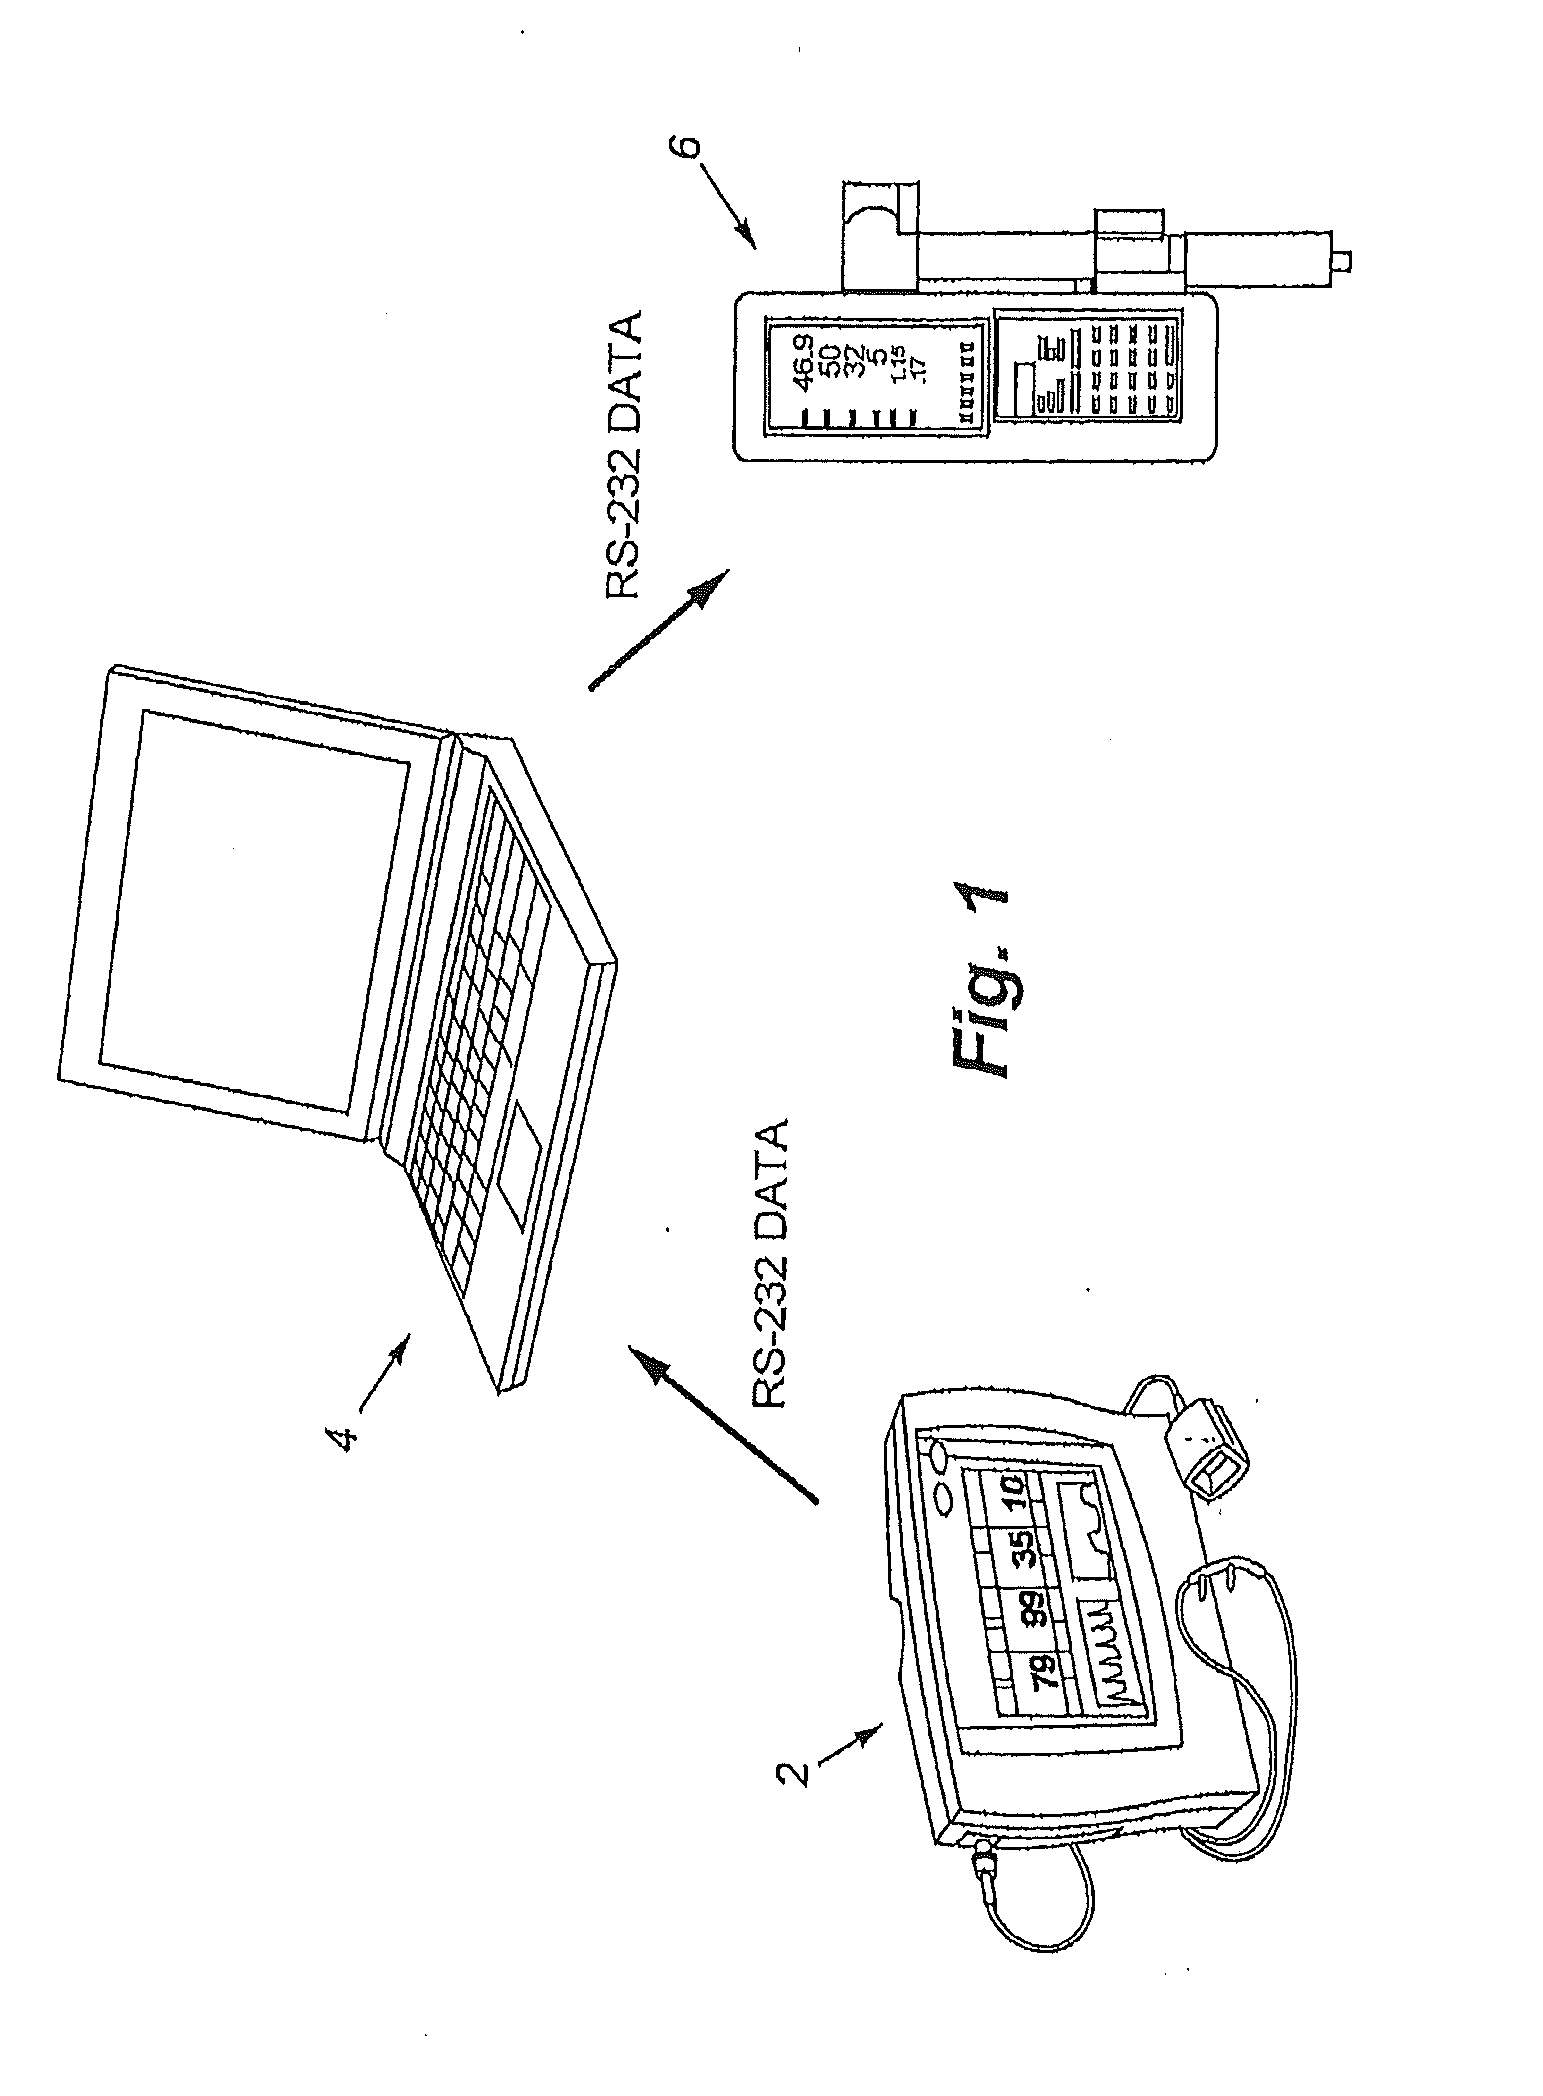 Monitoring and delivery system for supplying patient with controlled dosage of substance reversal agent